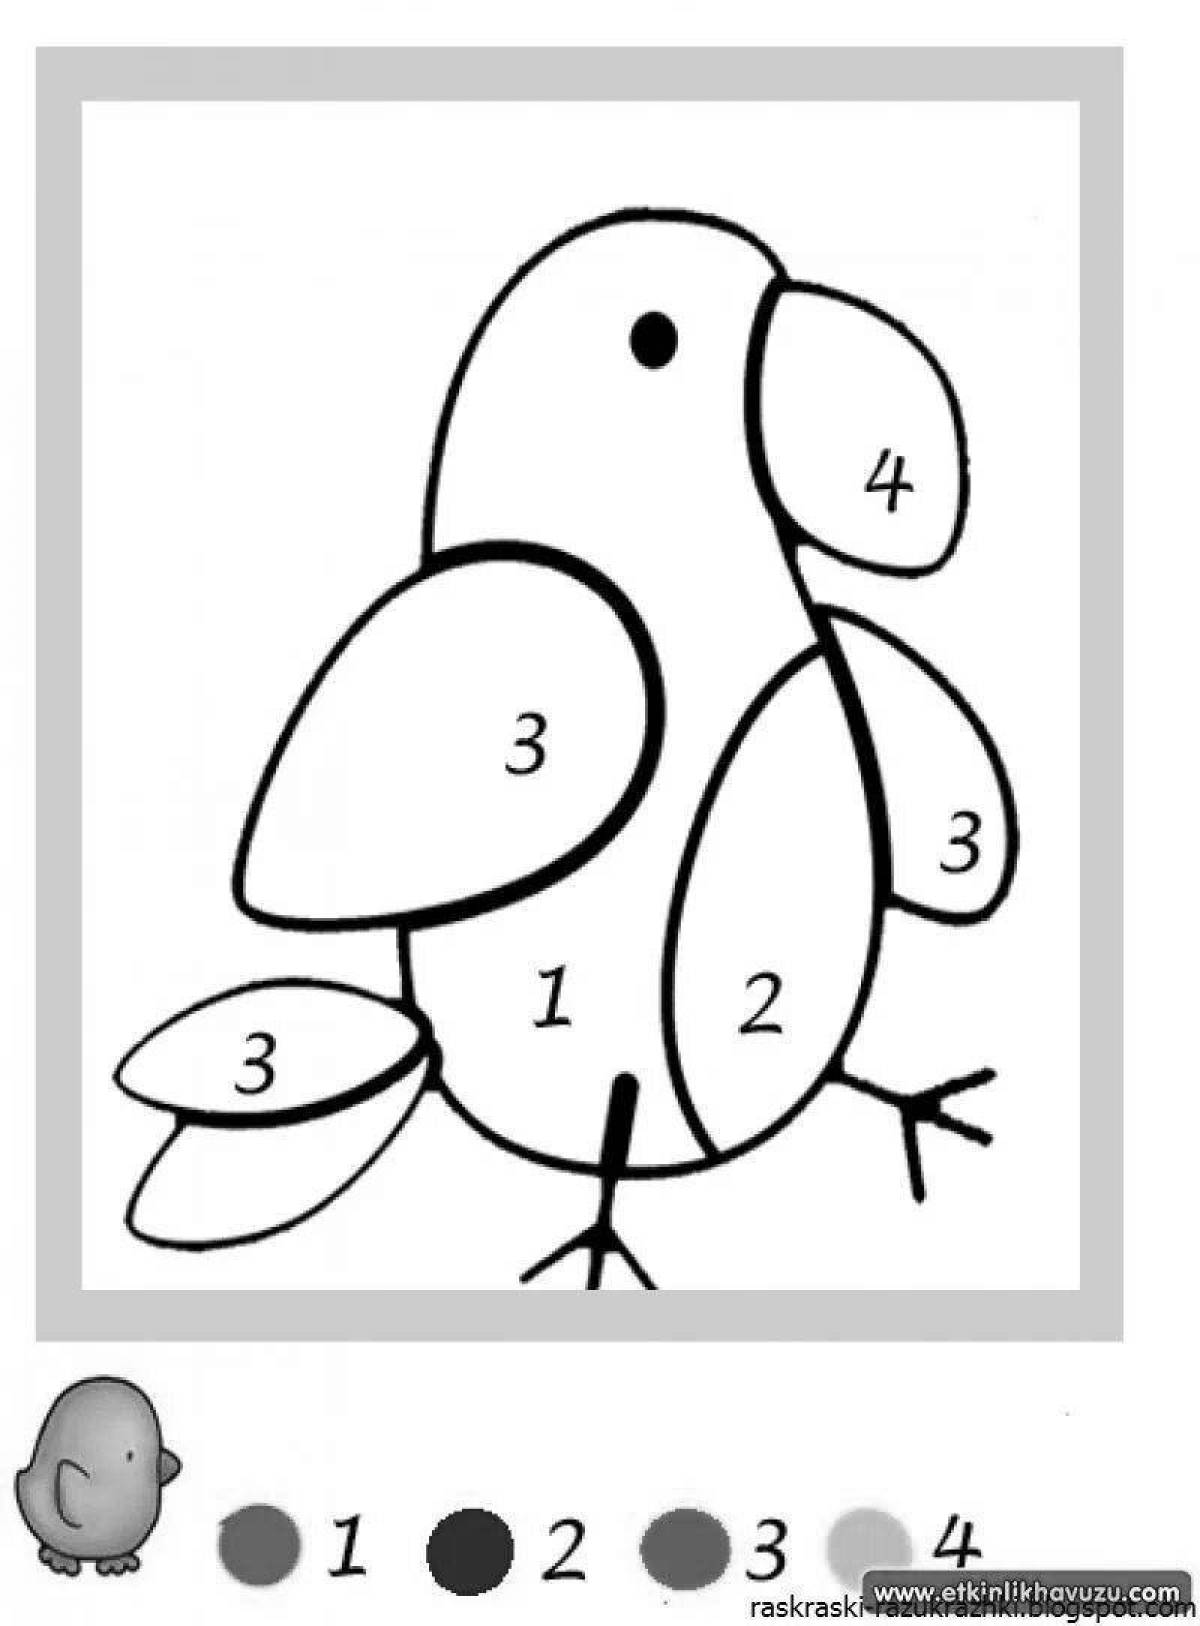 Stimulating math coloring book for 4-5 year olds